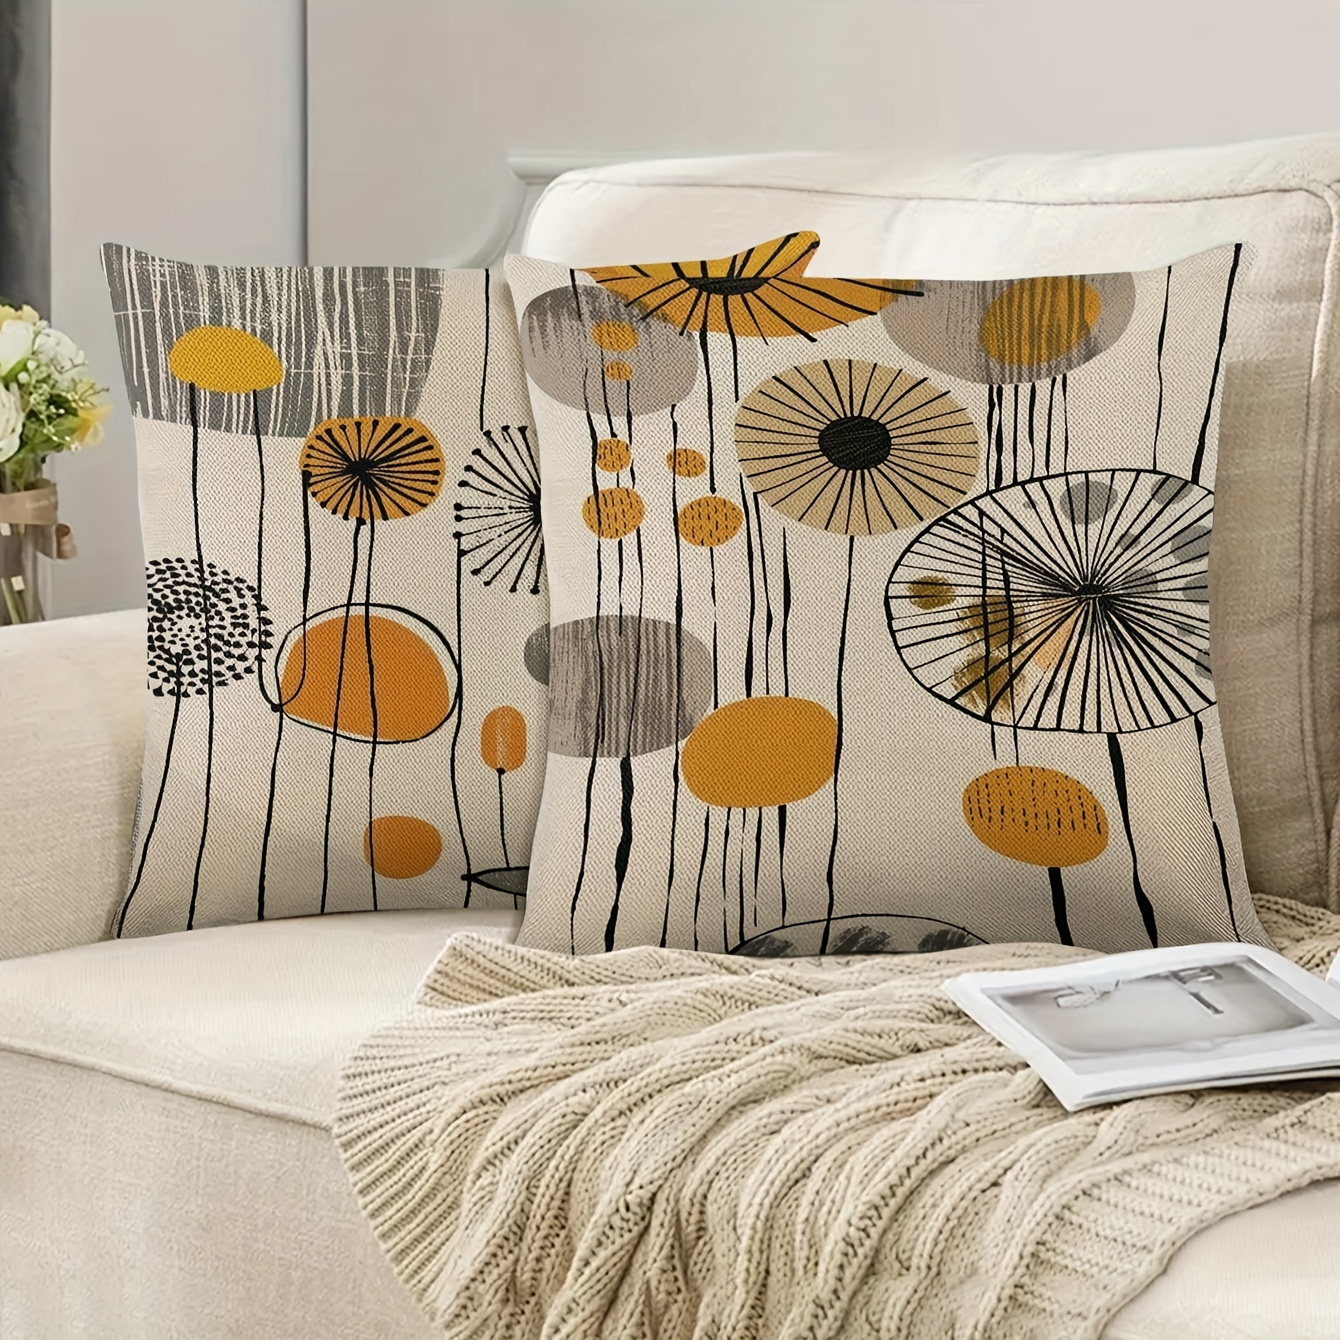 

2-piece Dandelion Print Linen Pillowcases 18x18 Inches - Zippered, Machine Washable Covers For Sofa, Bed, And Home Decor (inserts Not Included)